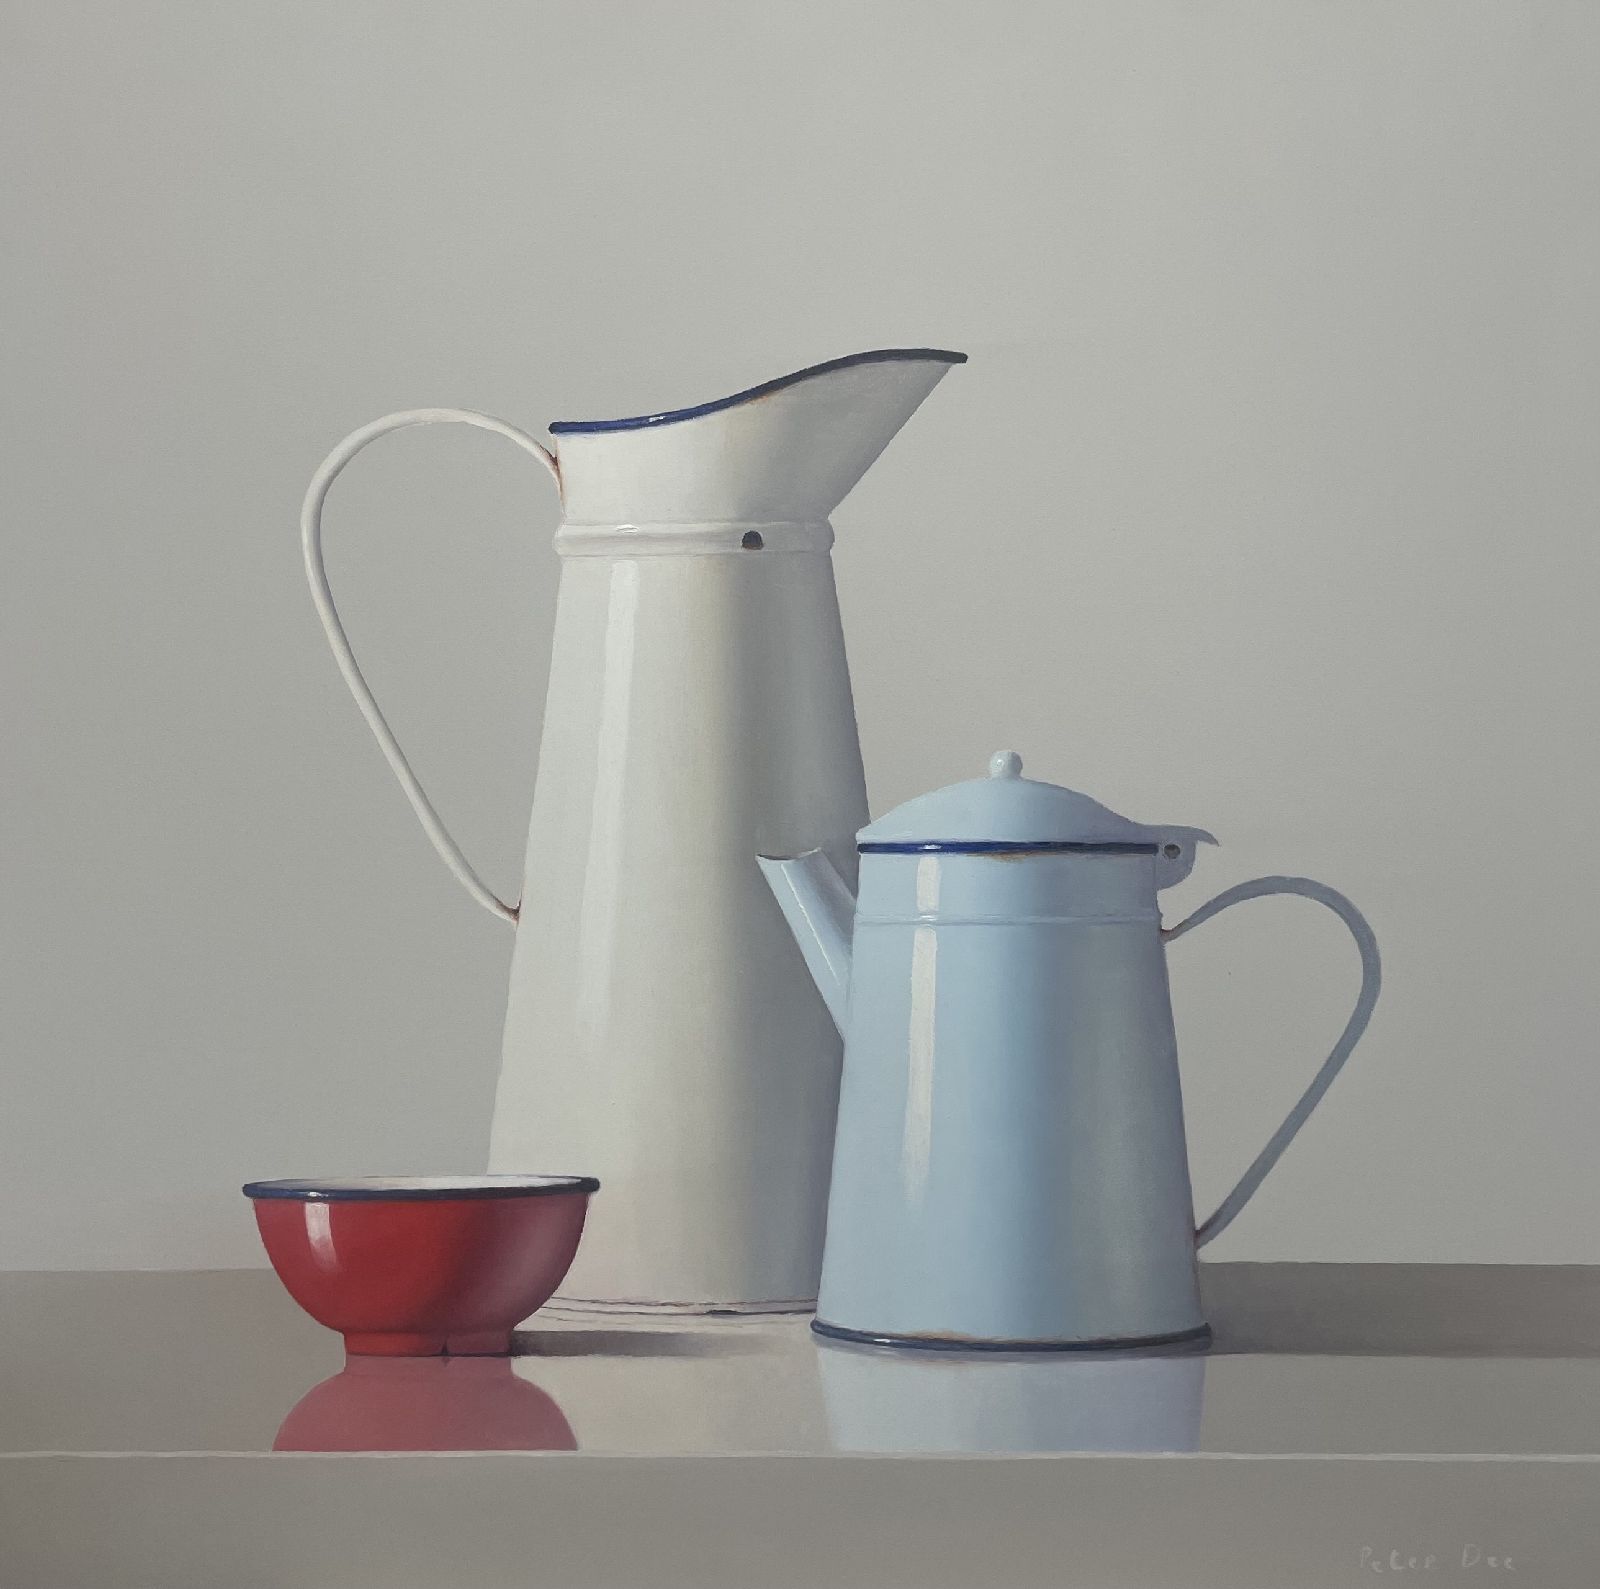 Red, White and Blue Vintage Enamelware by Peter Dee